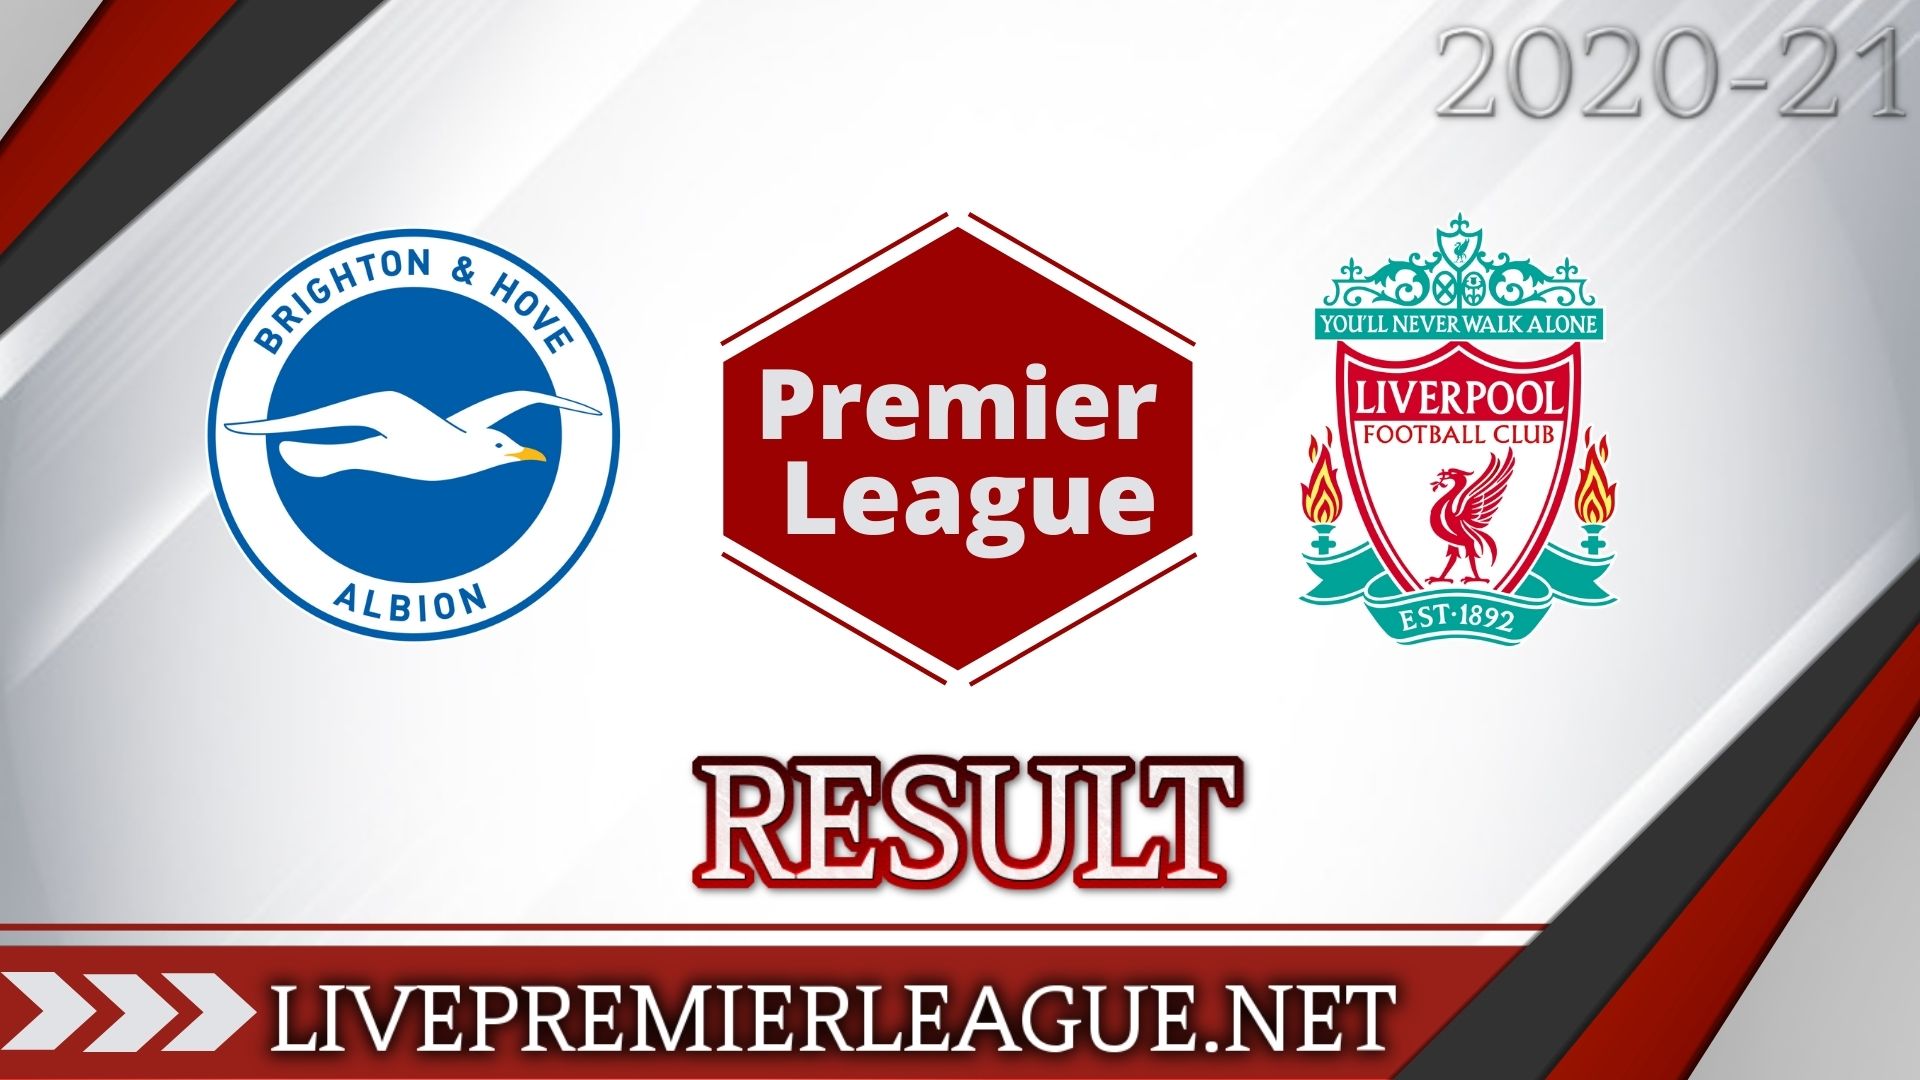 Brighton and Hove Albion Vs Liverpool | Week 10 Result 2020